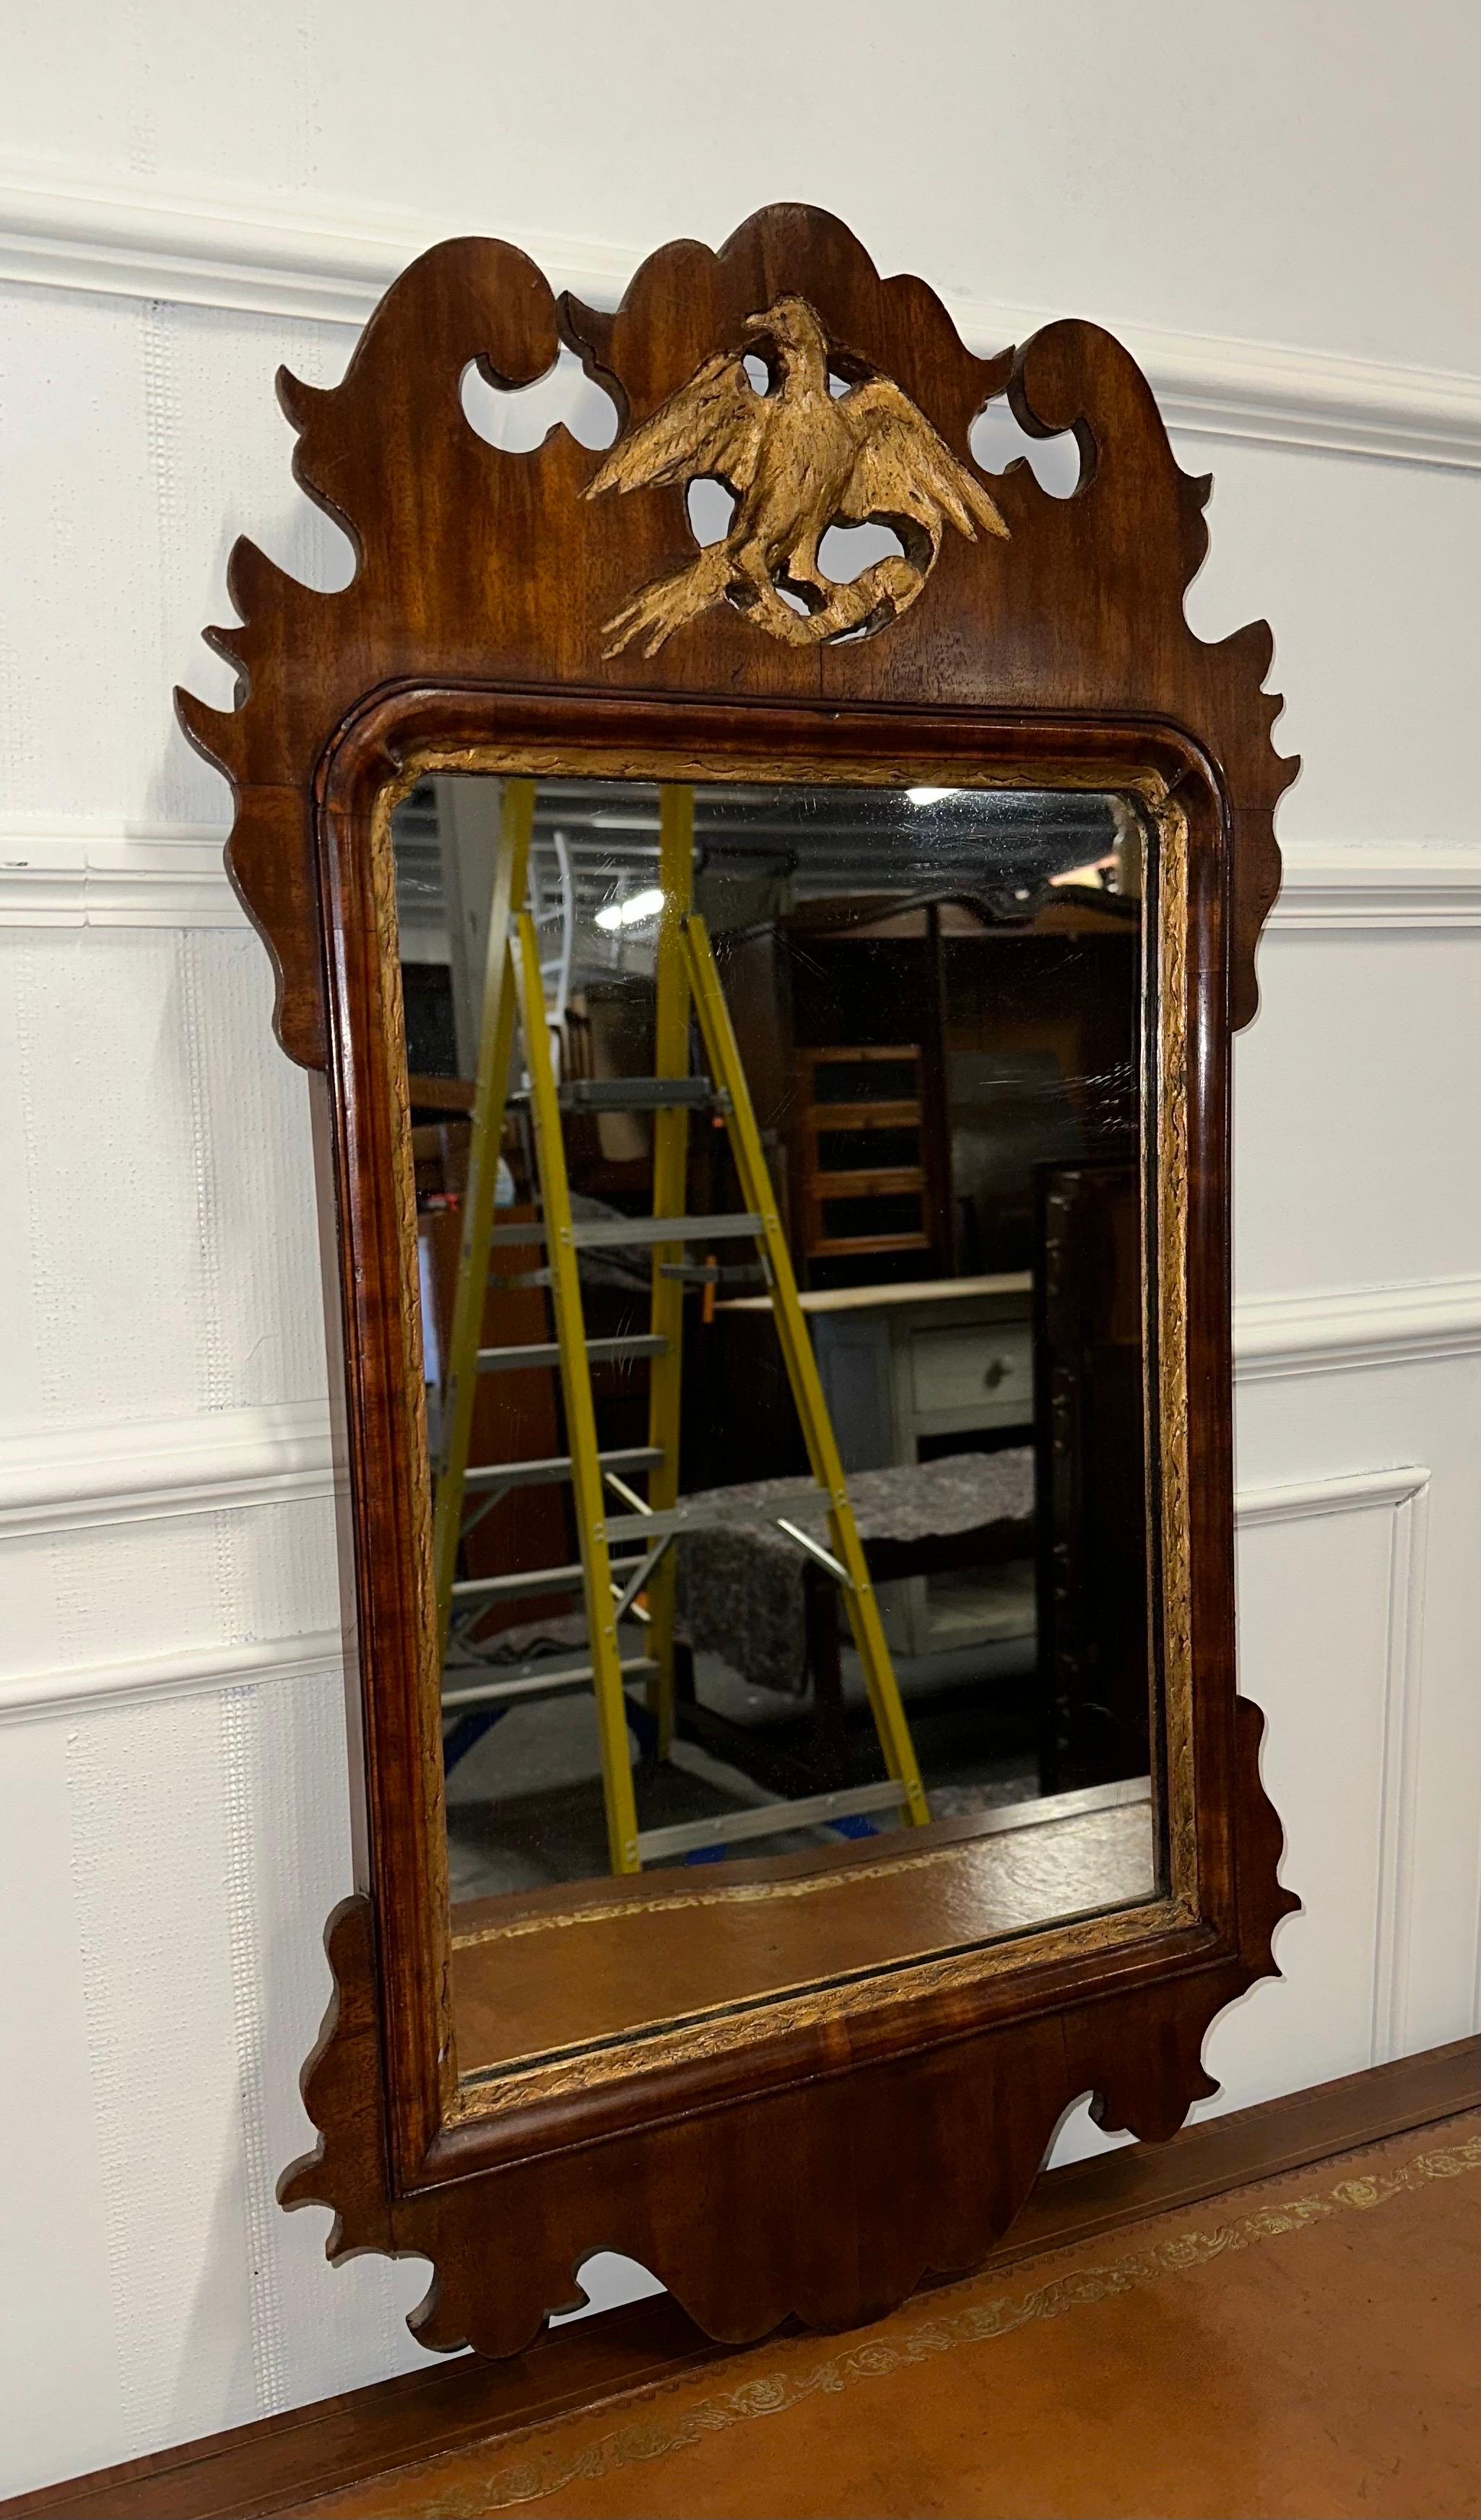 We are delighted to offer for sale this Stunning Georgian Thomas Chippendale Phoenix Wall Mirror.

This Georgian circa 1760 Thomas Chippendale Phoenix giltwood mirror is a magnificent example of the iconic furniture designer's work. The frame of